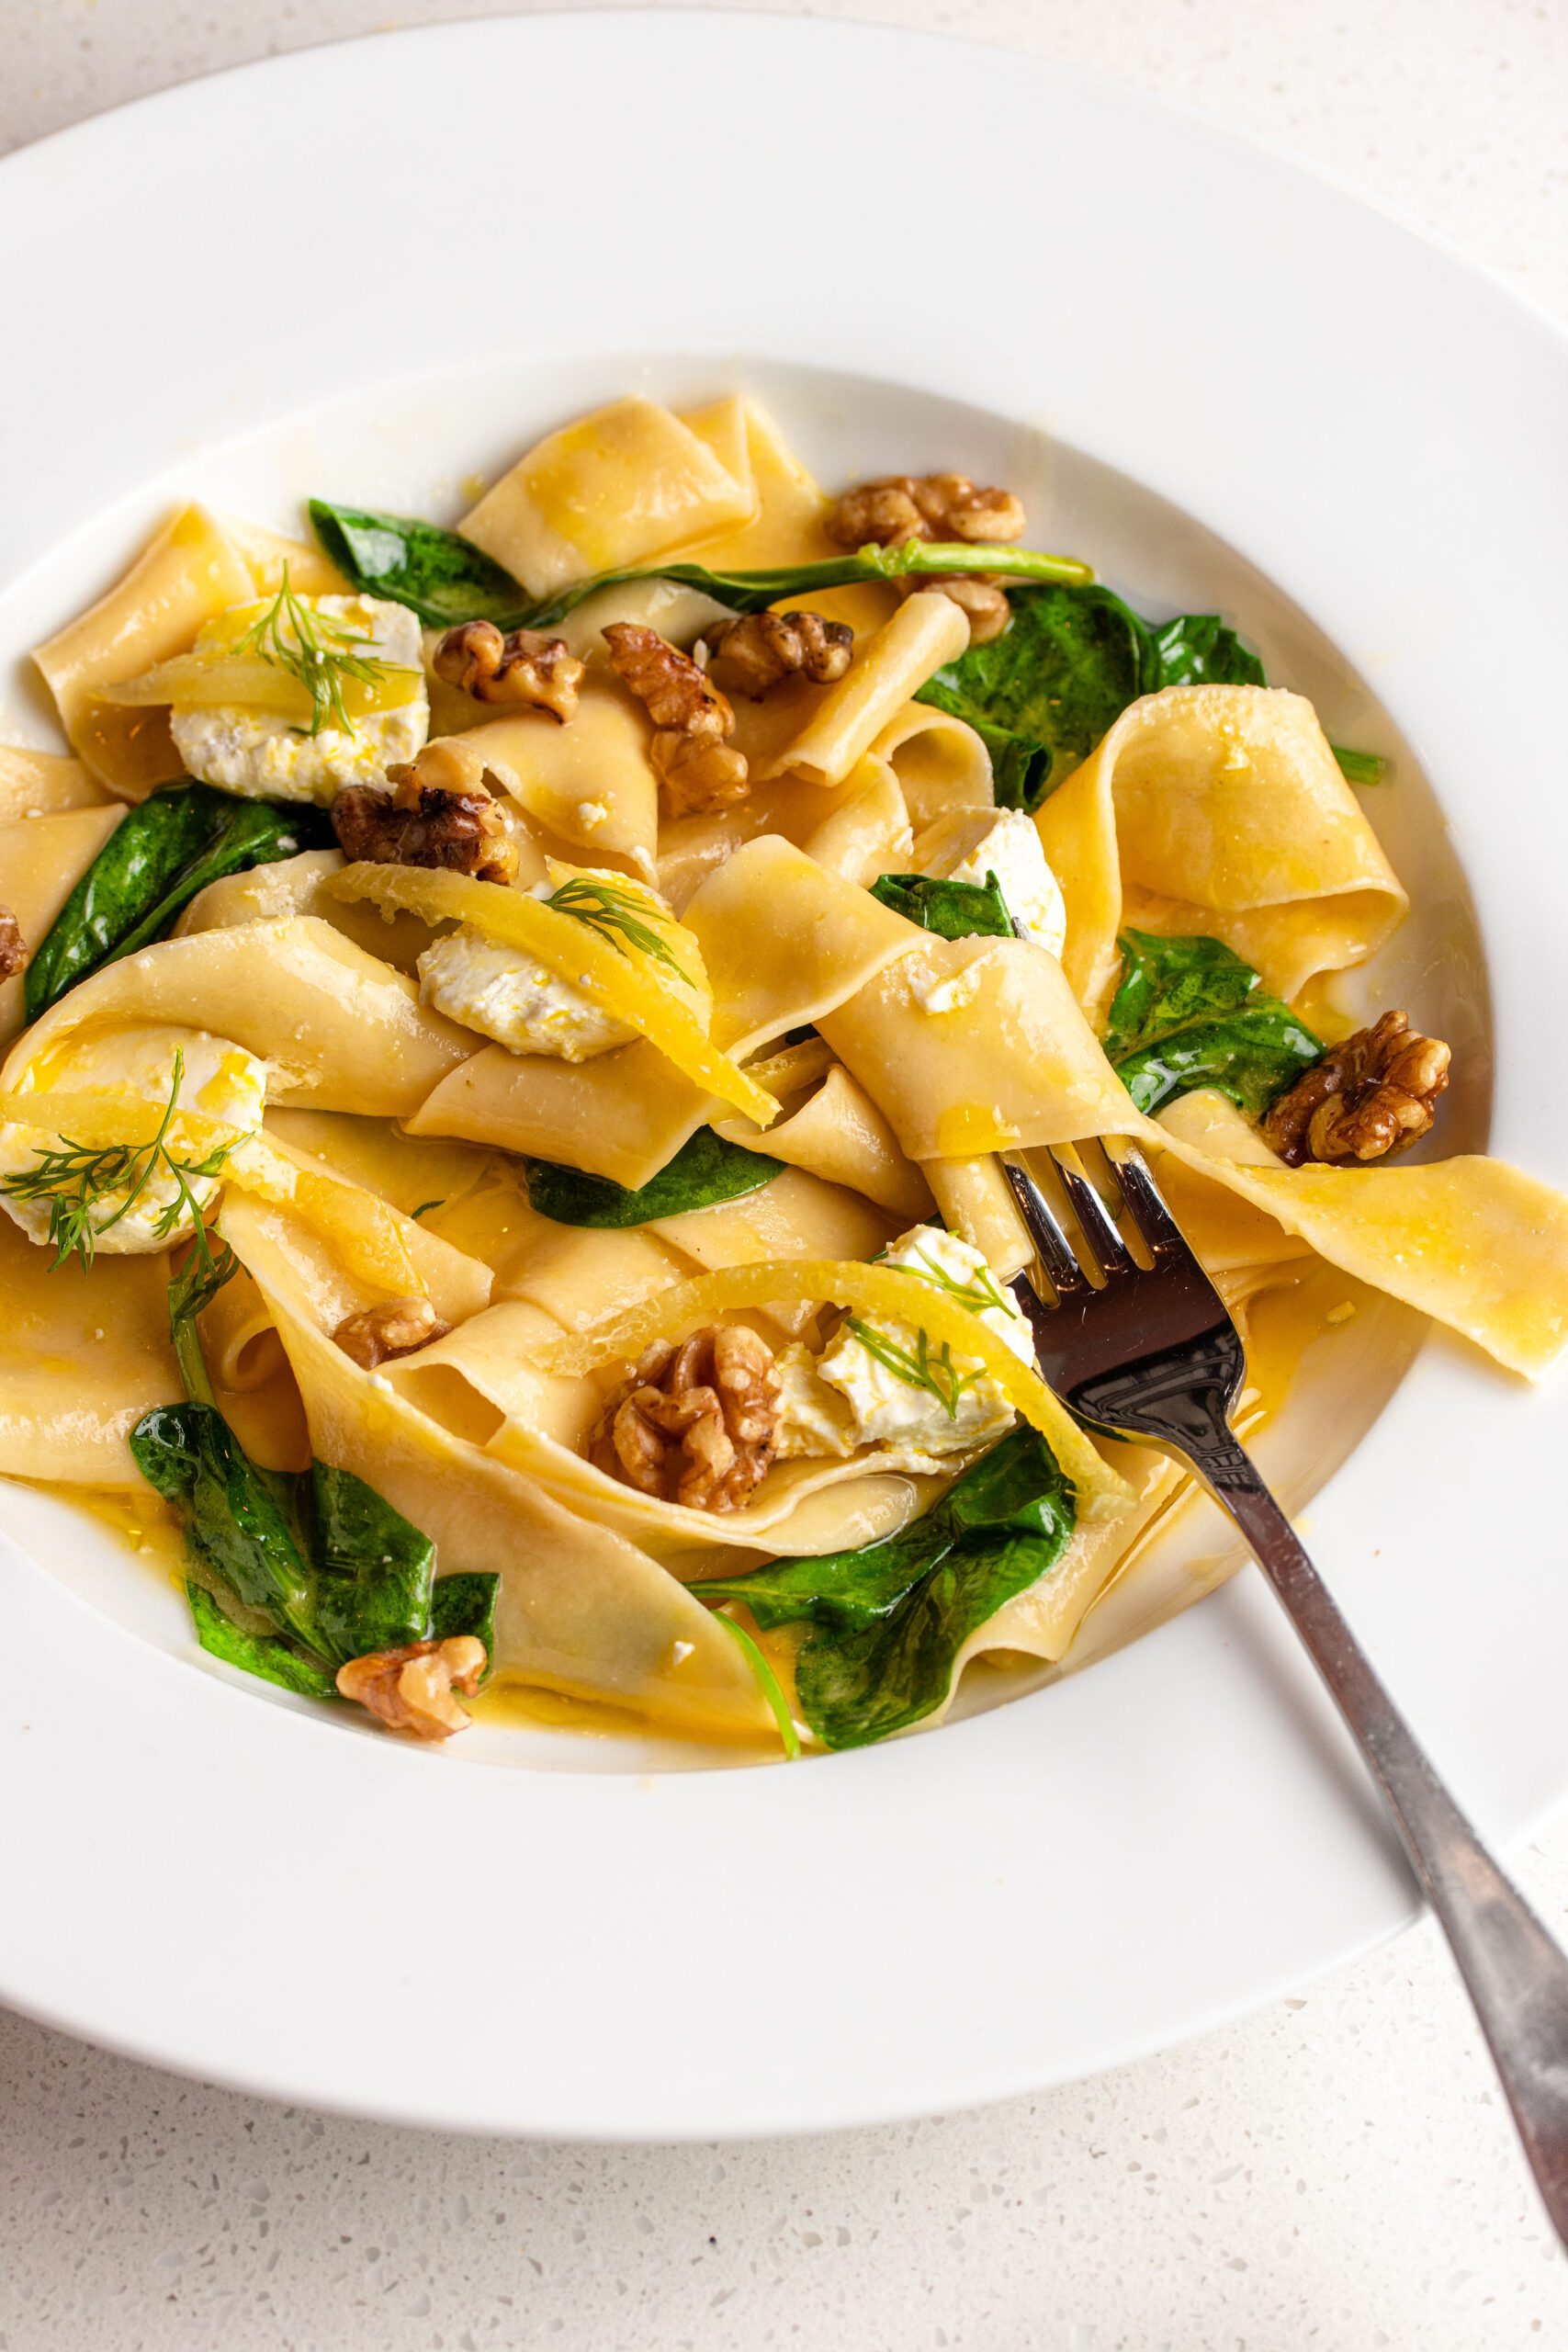 Easy Homemade Pappardelle Pasta Recipe - The Burnt Butter Table